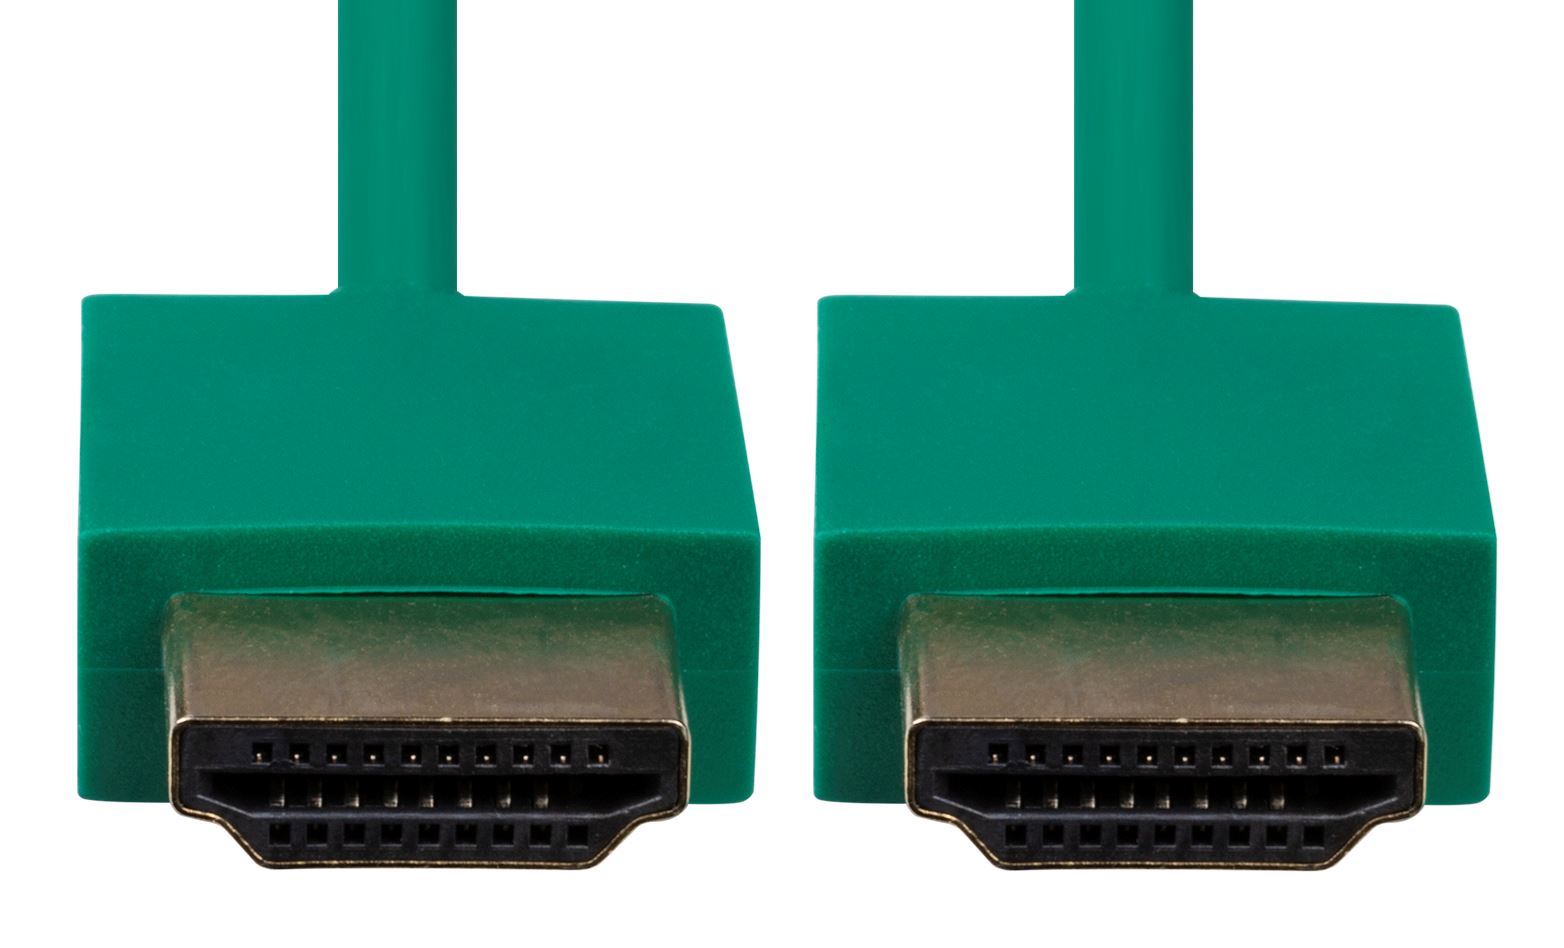 DYNAMIX_1.5M_HDMI_GREEN_Nano_High_Speed_With_Ethernet_Cable._Designed_for_UHD_Display_up_to_4K2K@60Hz._Slimline_Robust_Cable._Supports_CEC_2.0,_3D,_&_ARC._Supports_Up_to_32_Audio_Channels. 758